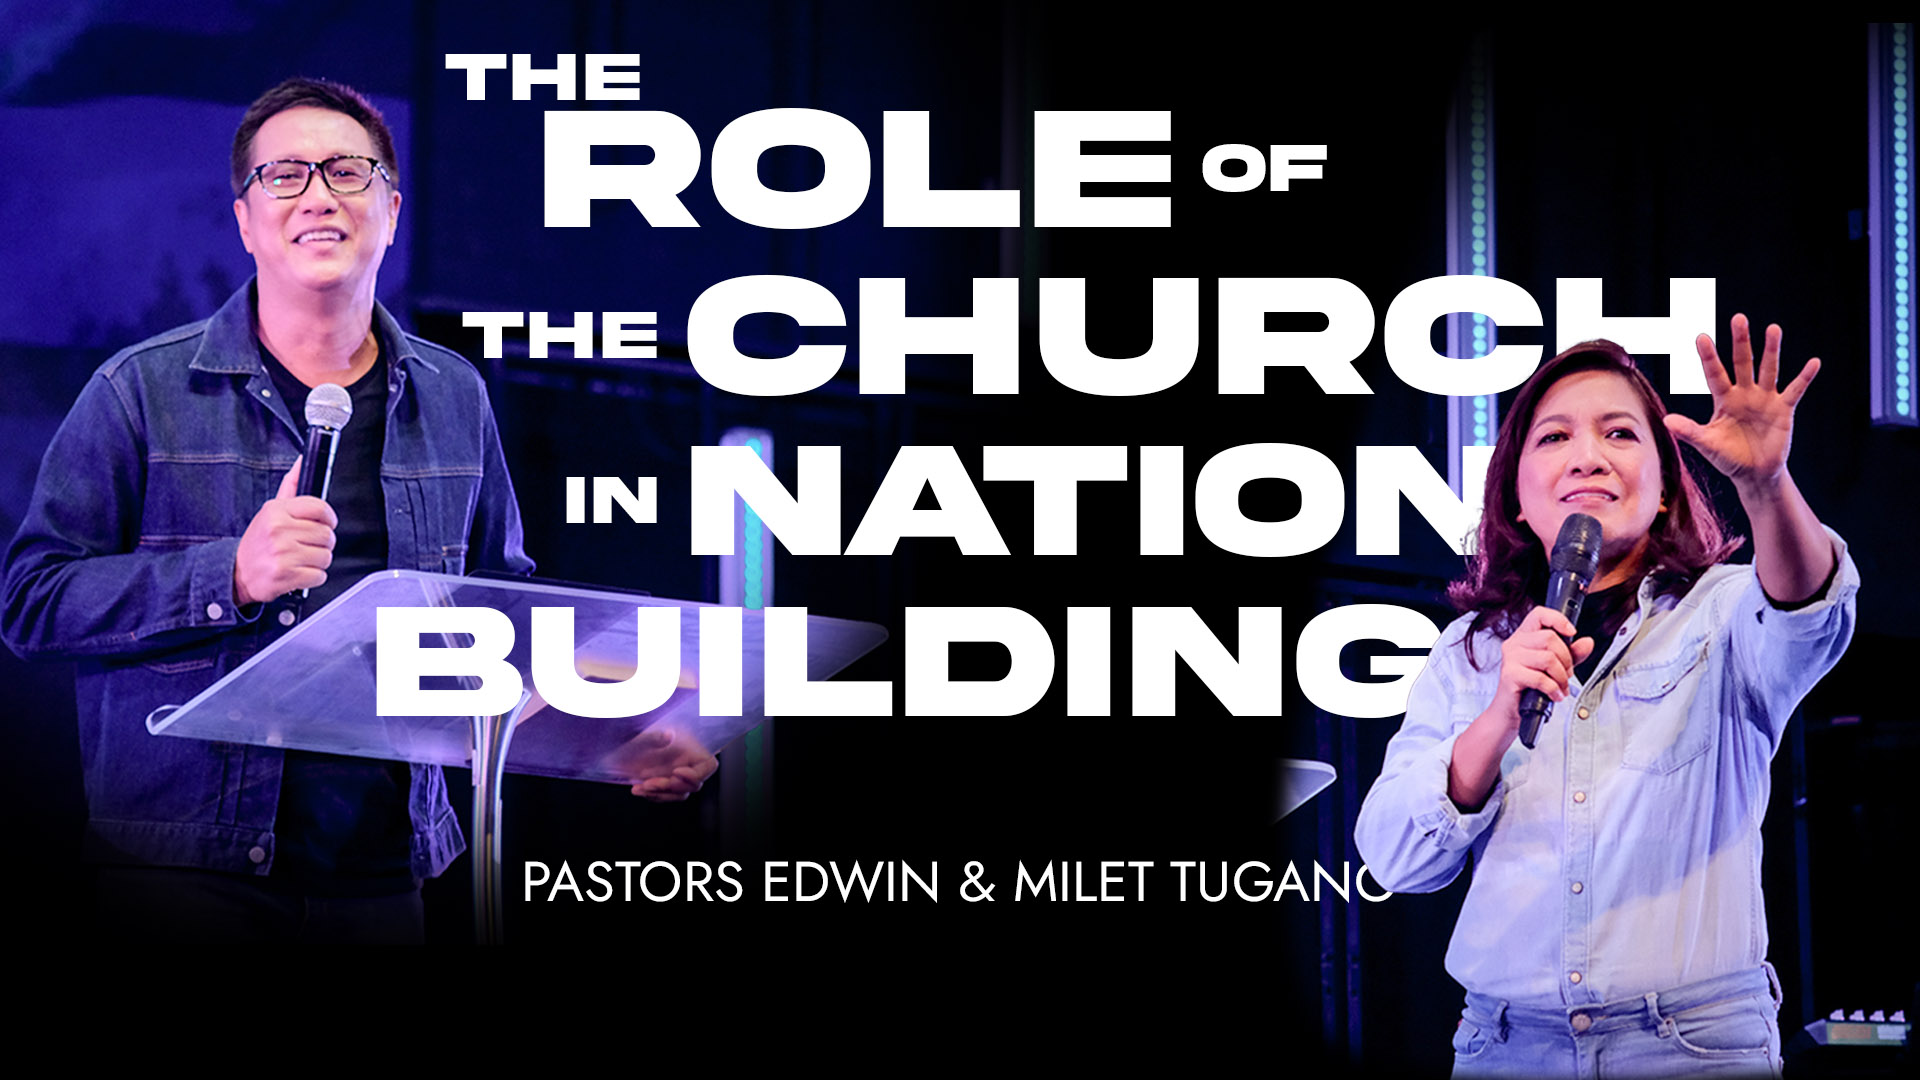 THE ROLE OF THE CHURCH IN NATION BUILDING